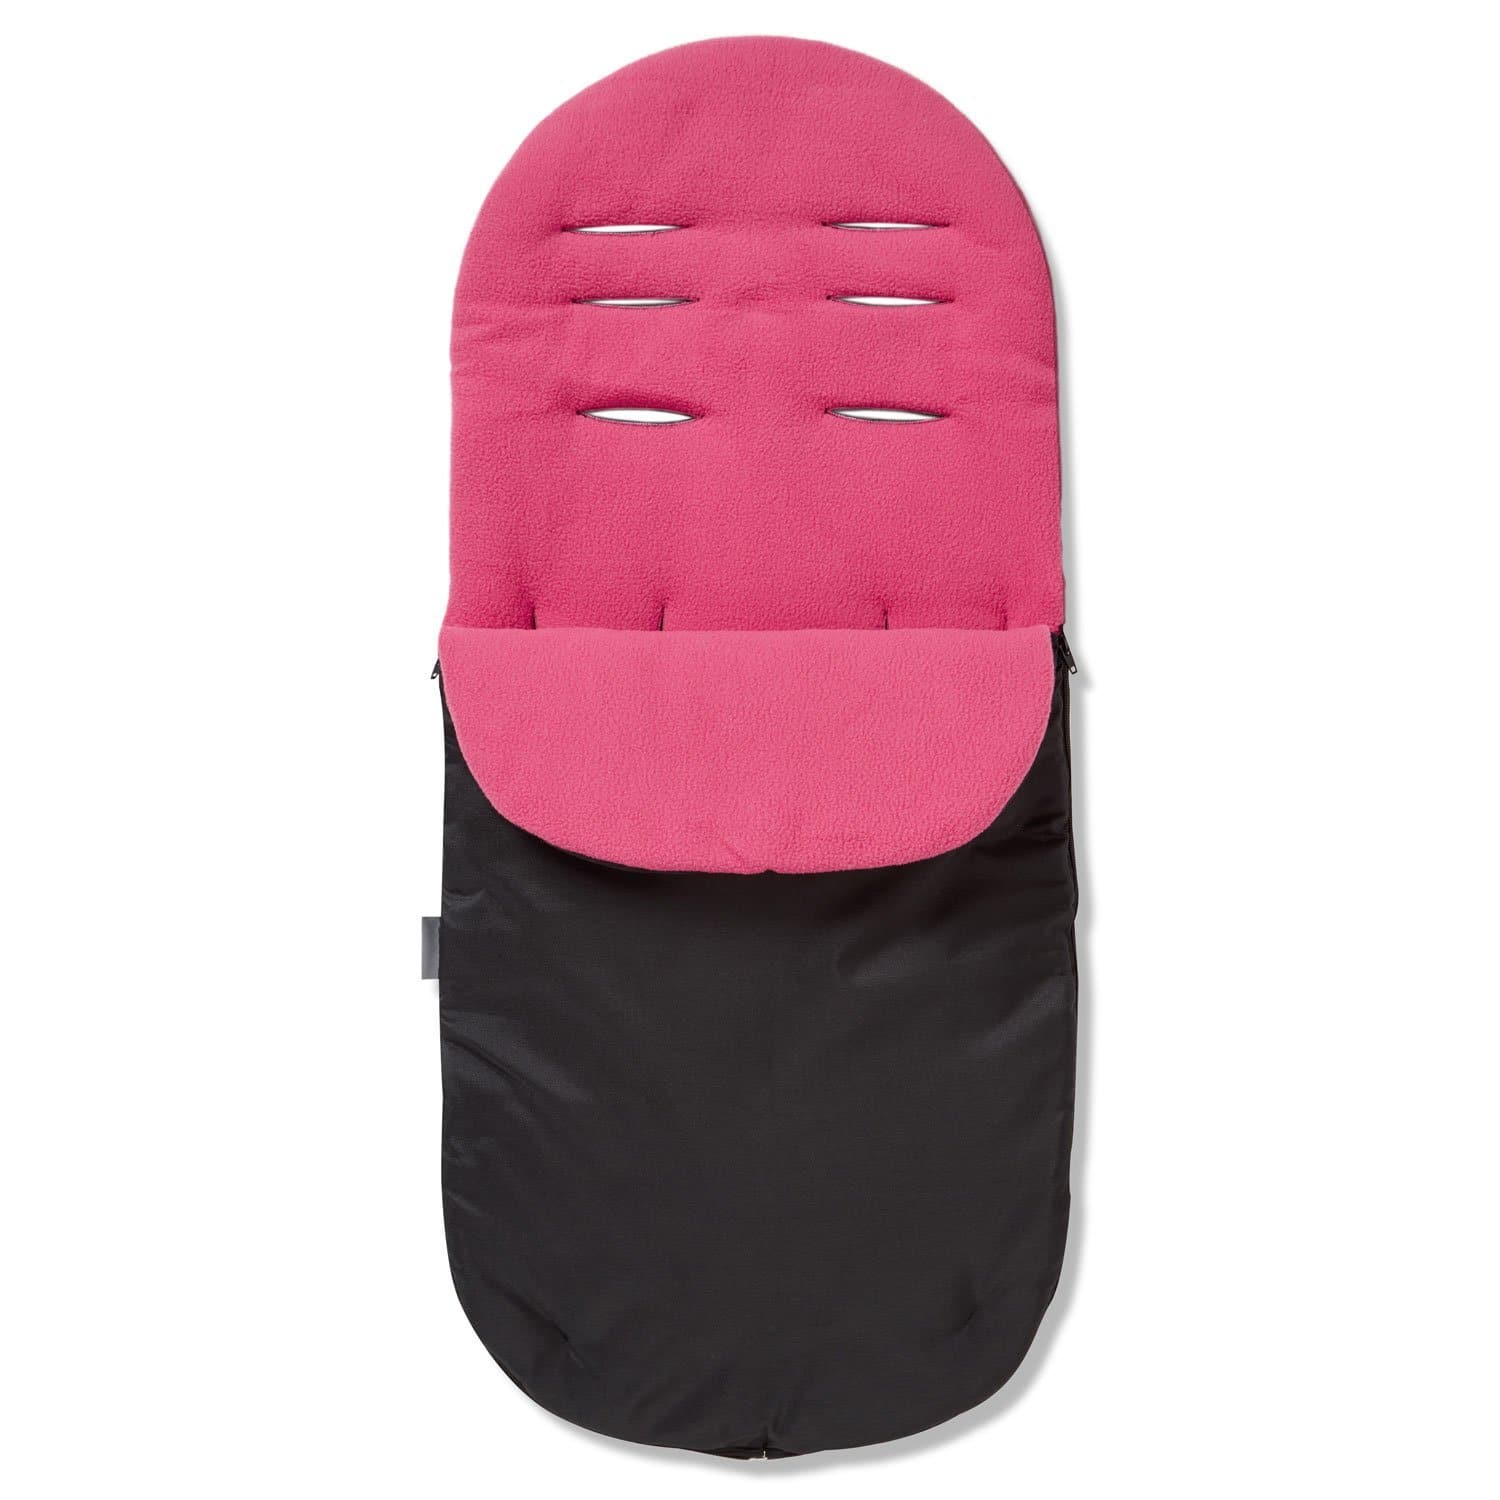 Footmuff / Cosy Toes Compatible with Cosatto - Dark Pink / Fits All Models | For Your Little One